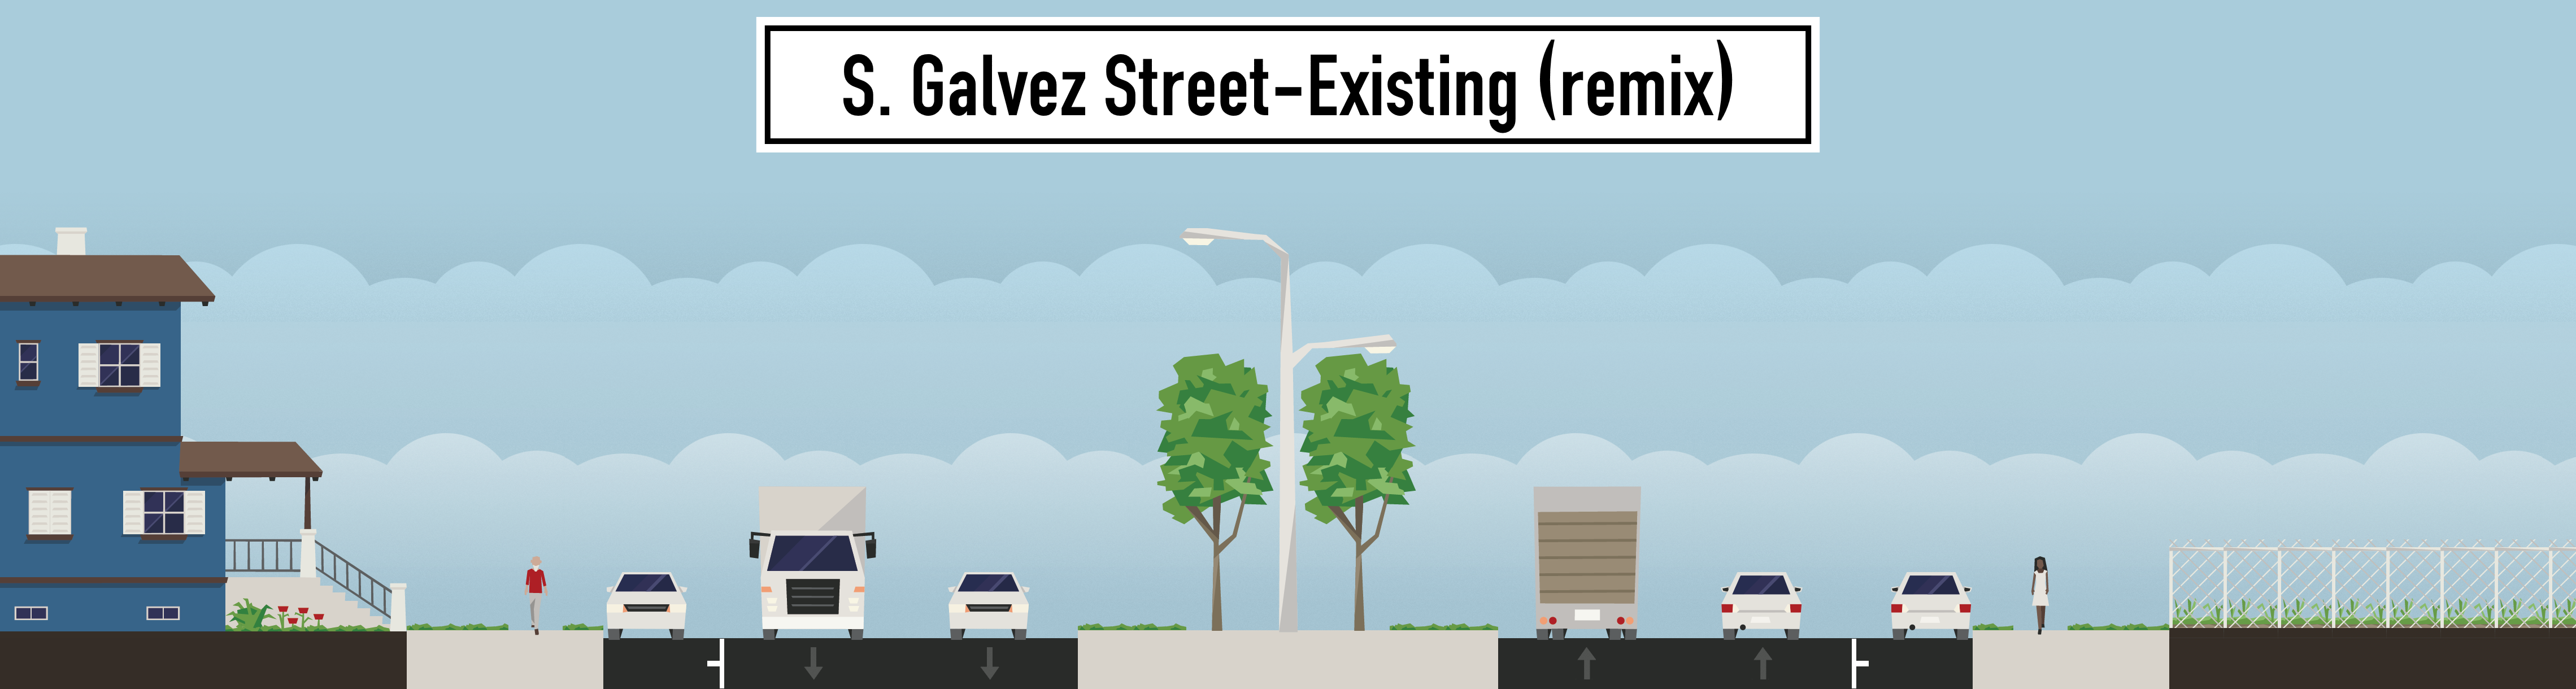 City to begin construction of S. Galvez St. Infrastructure Improvement Project in April